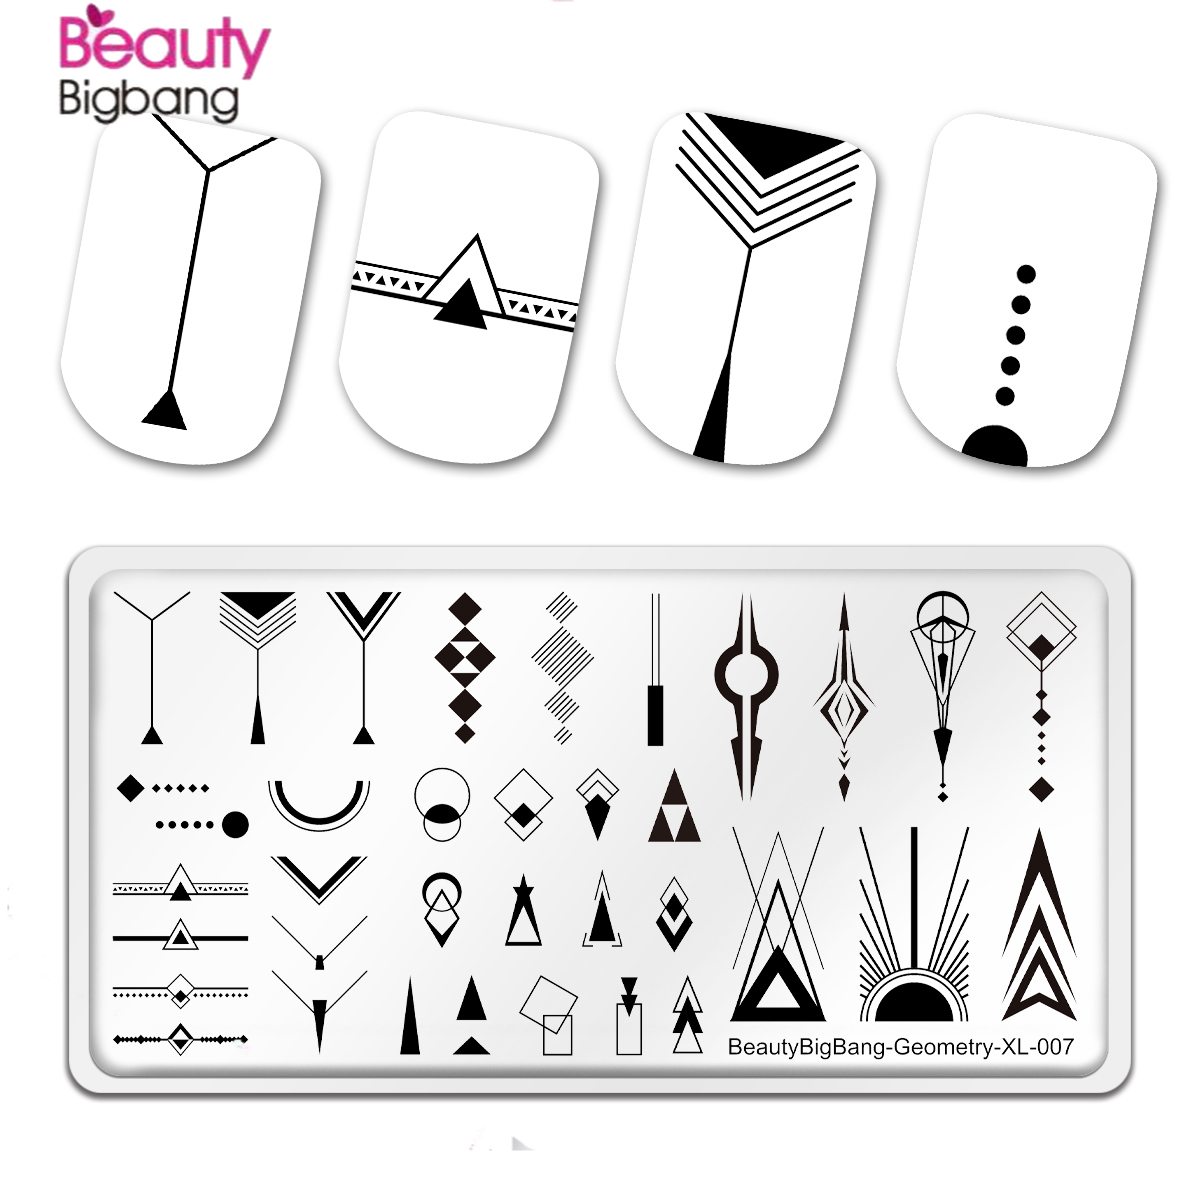 Shanglife BeautyBigbang Stainless Steel Template Stencil Nail Art Stamping